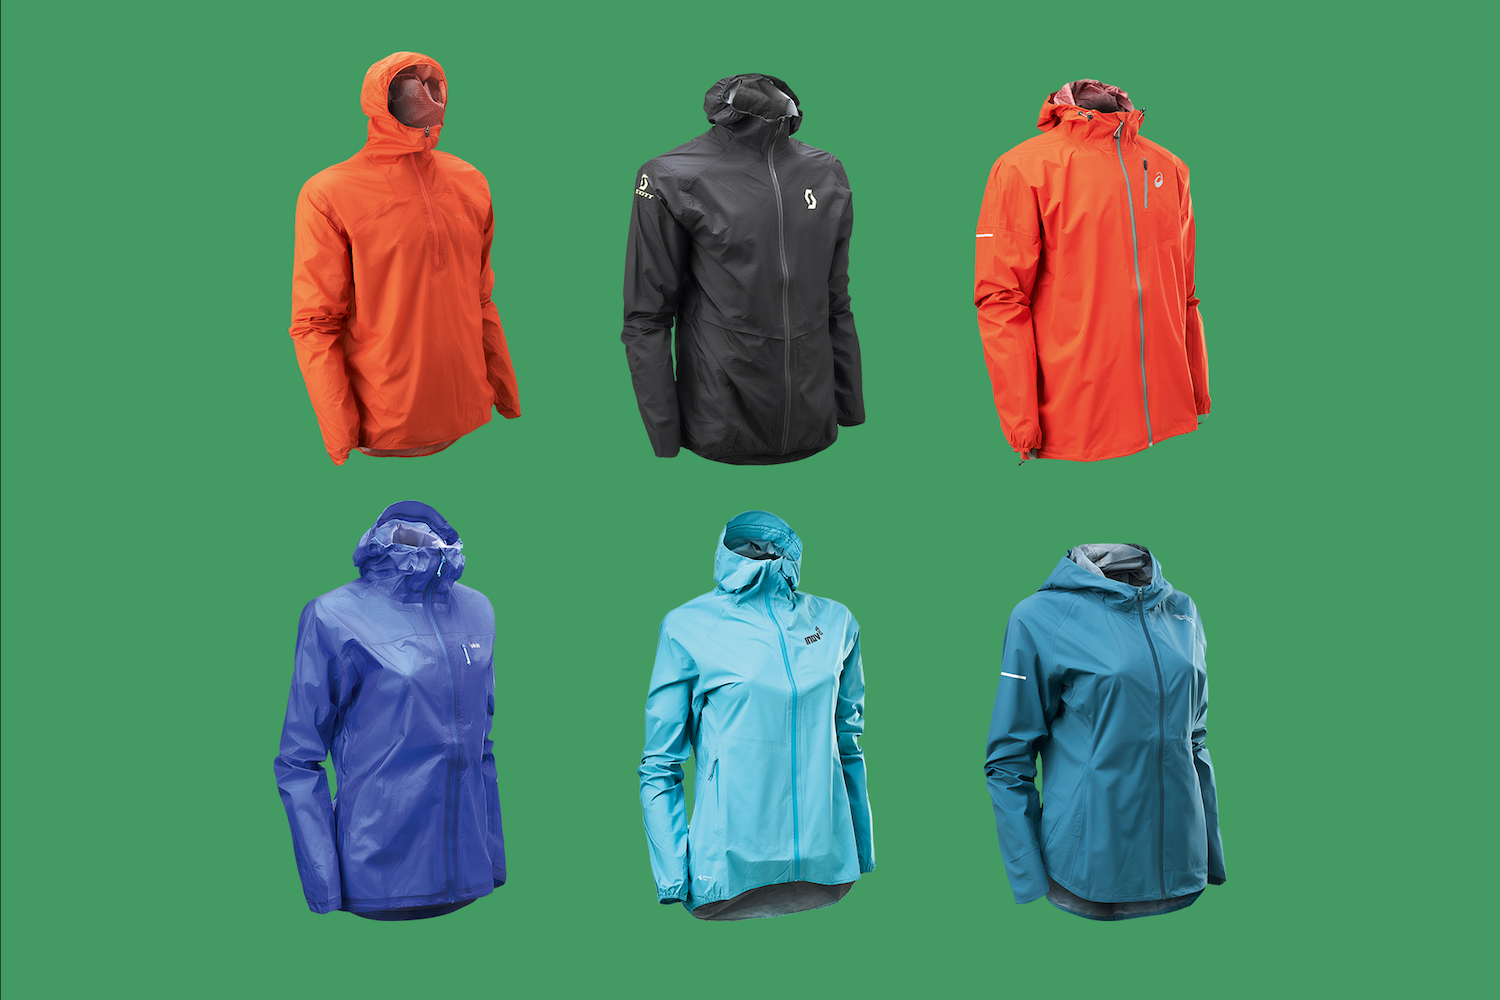 SOAR WINTER RUNNING GEAR REVIEW 2021 (IS IT WORTH THE HIGH PRICE